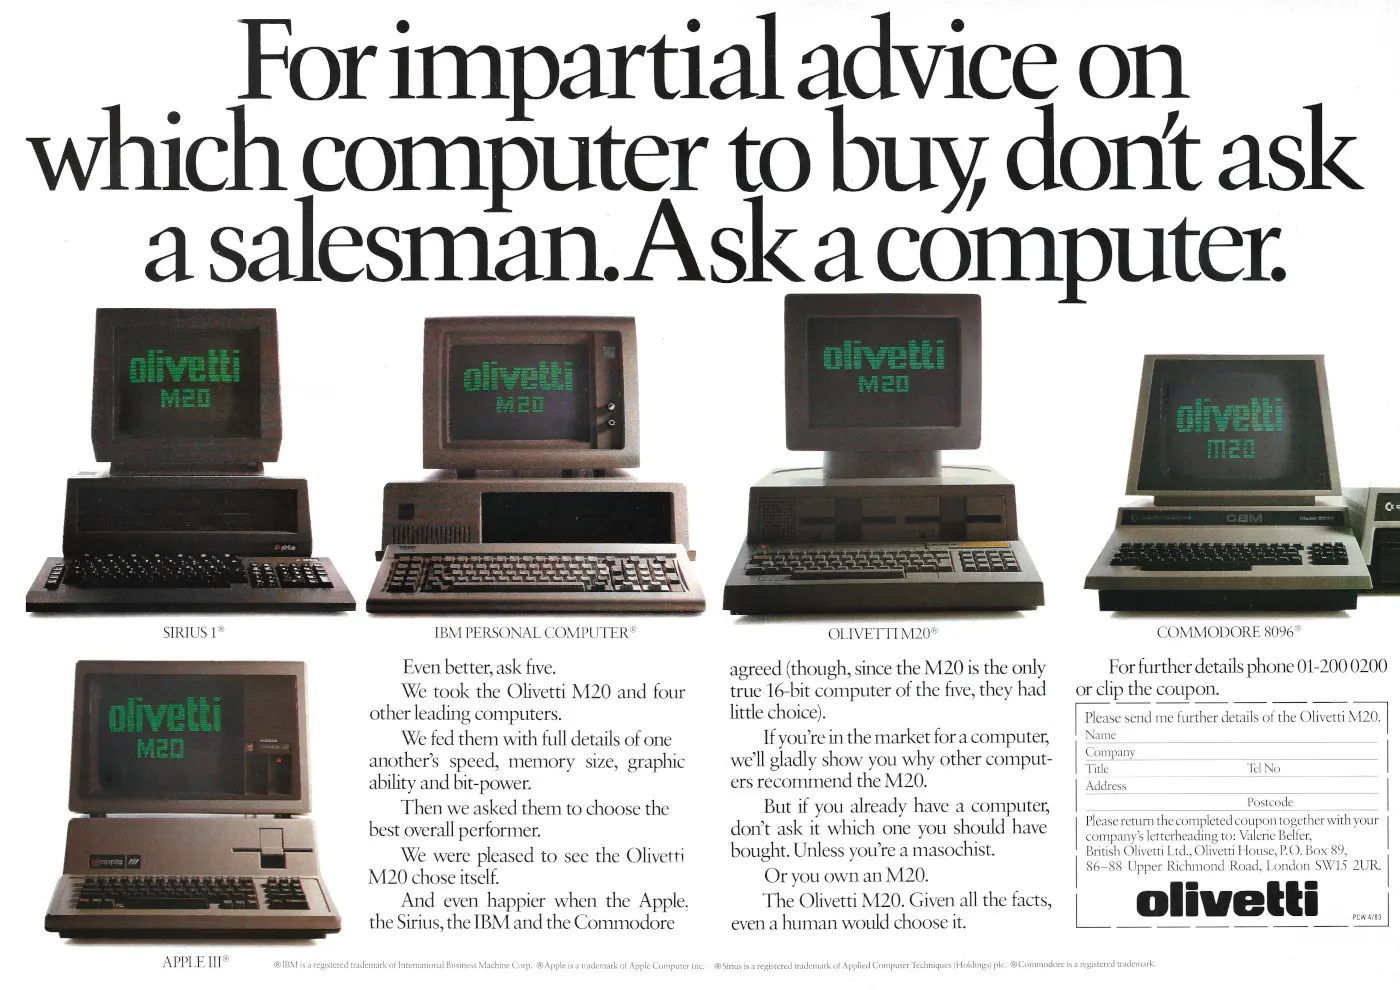 Olivetti Advert: For impartial advice on which computer to buy, don't ask a salesman.  Ask a computer, from Personal Computer World, April 1983